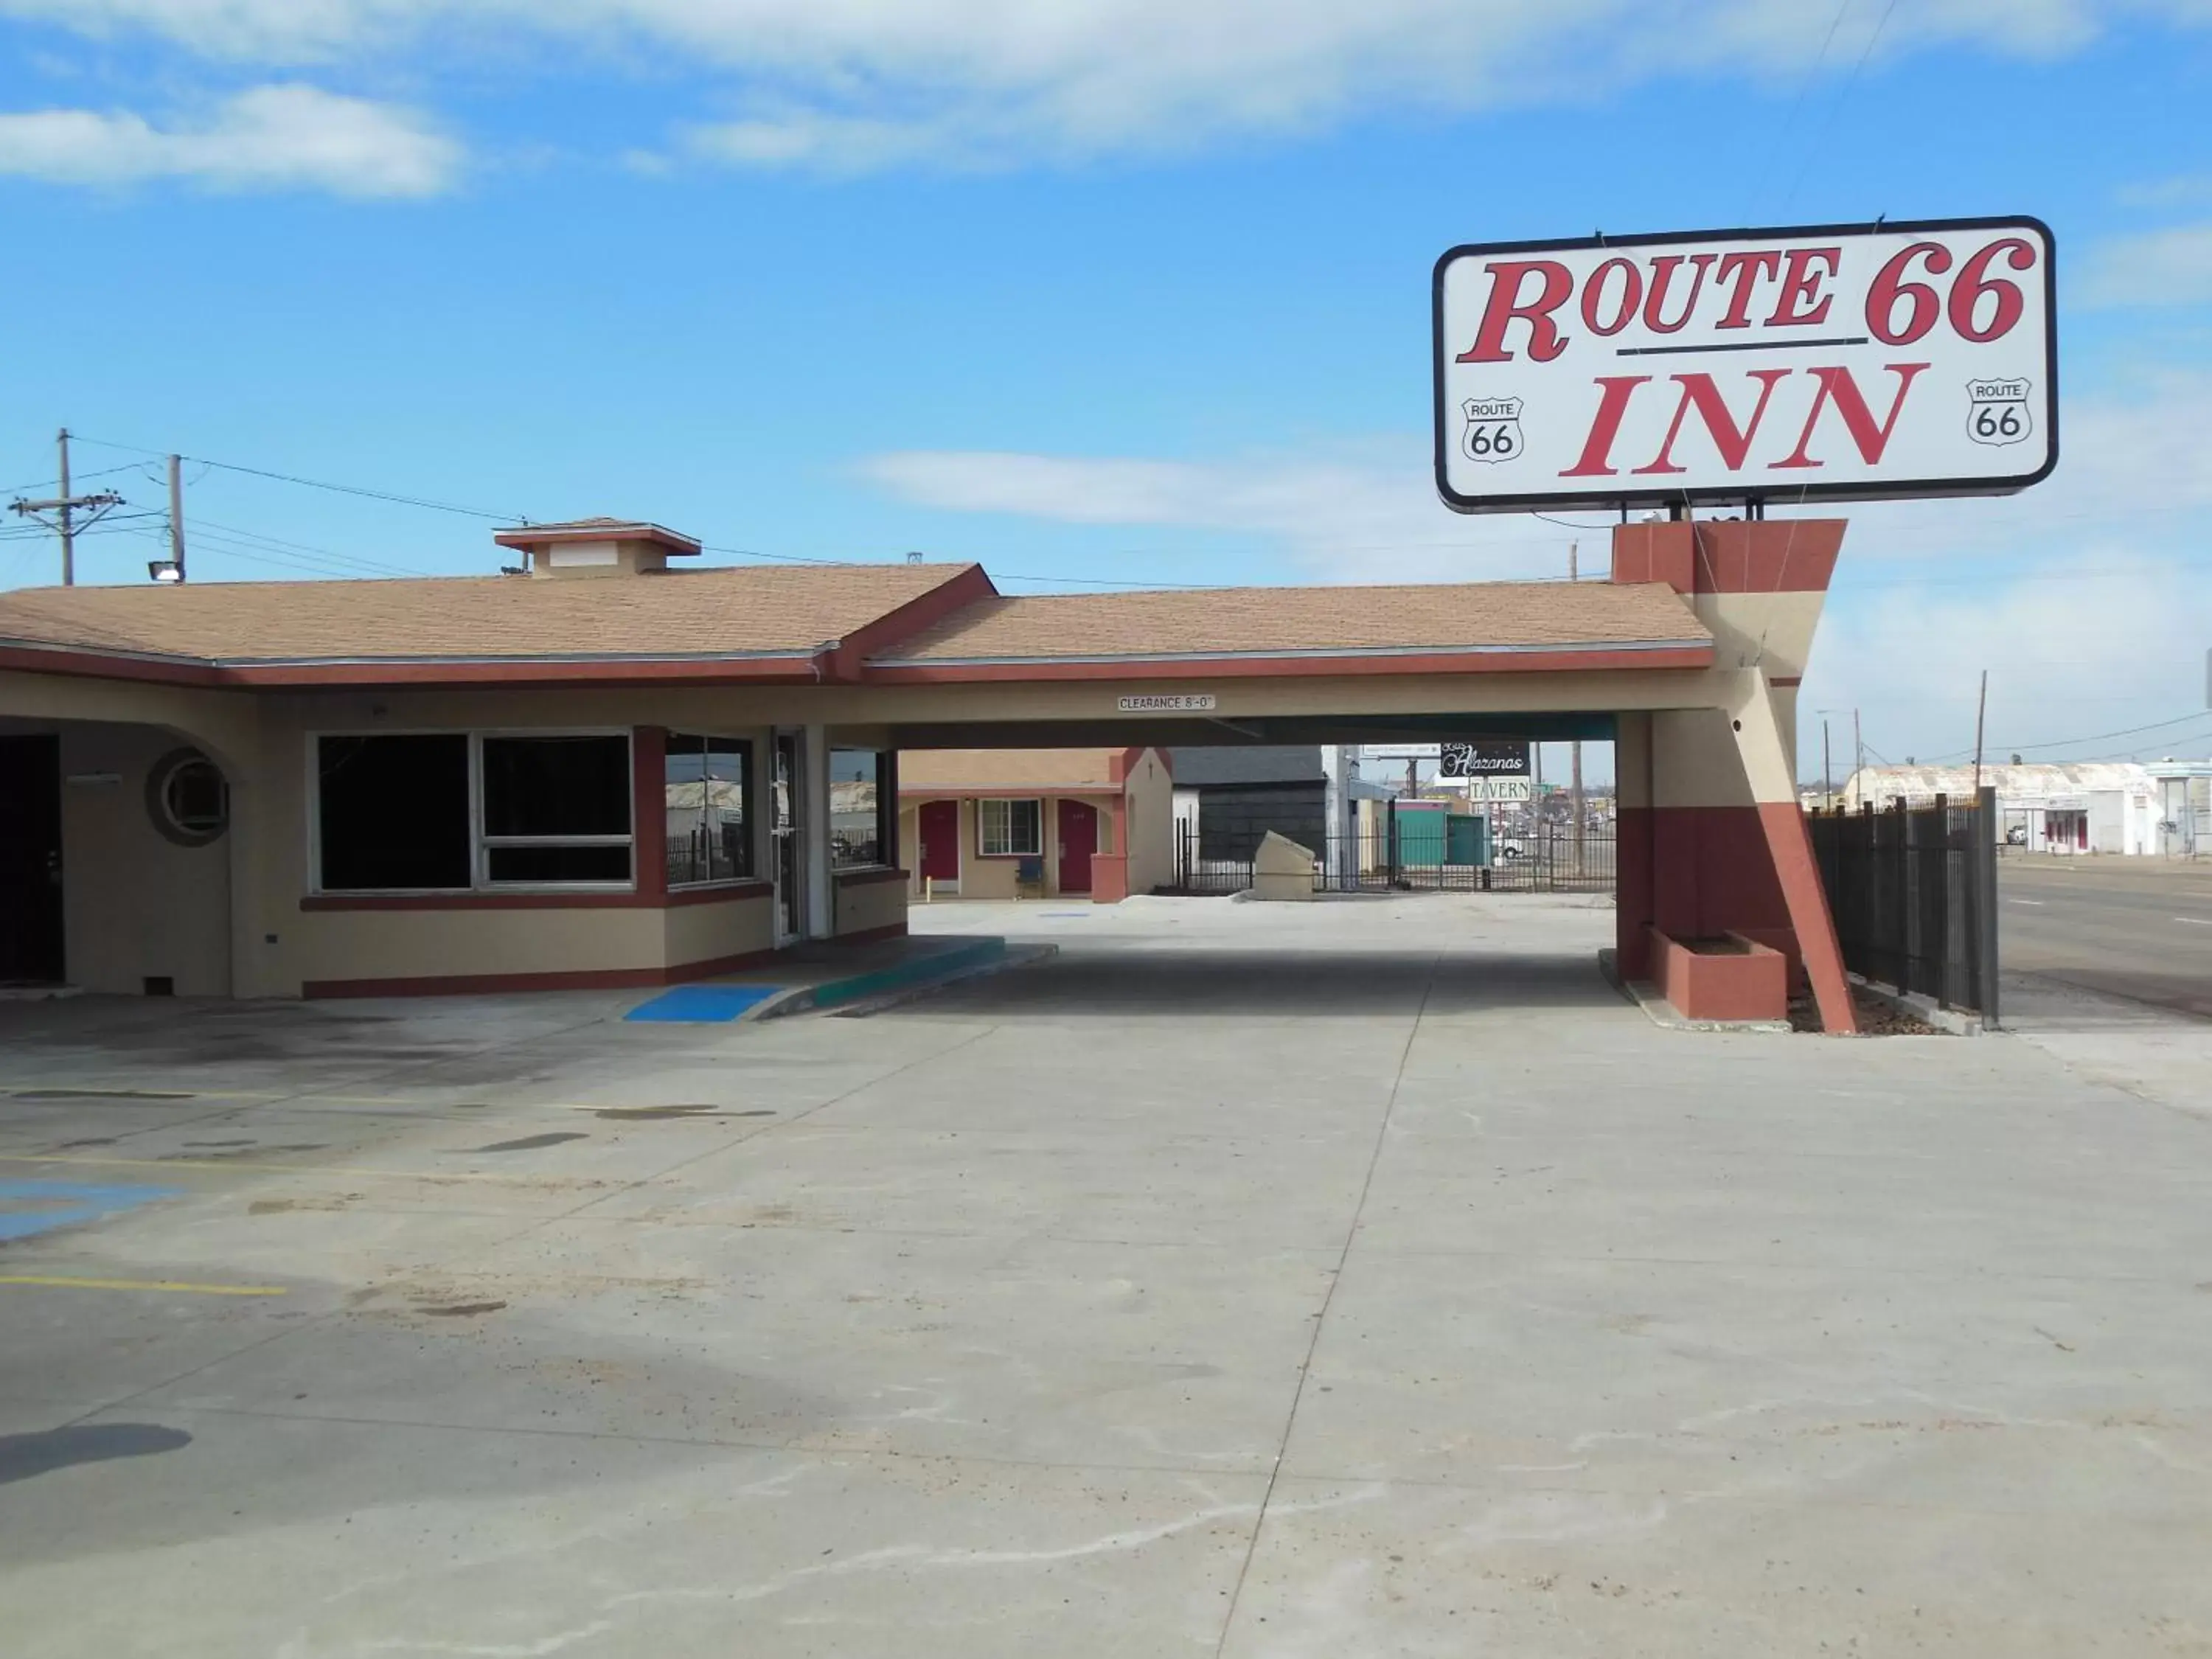 Property Building in Route 66 Inn